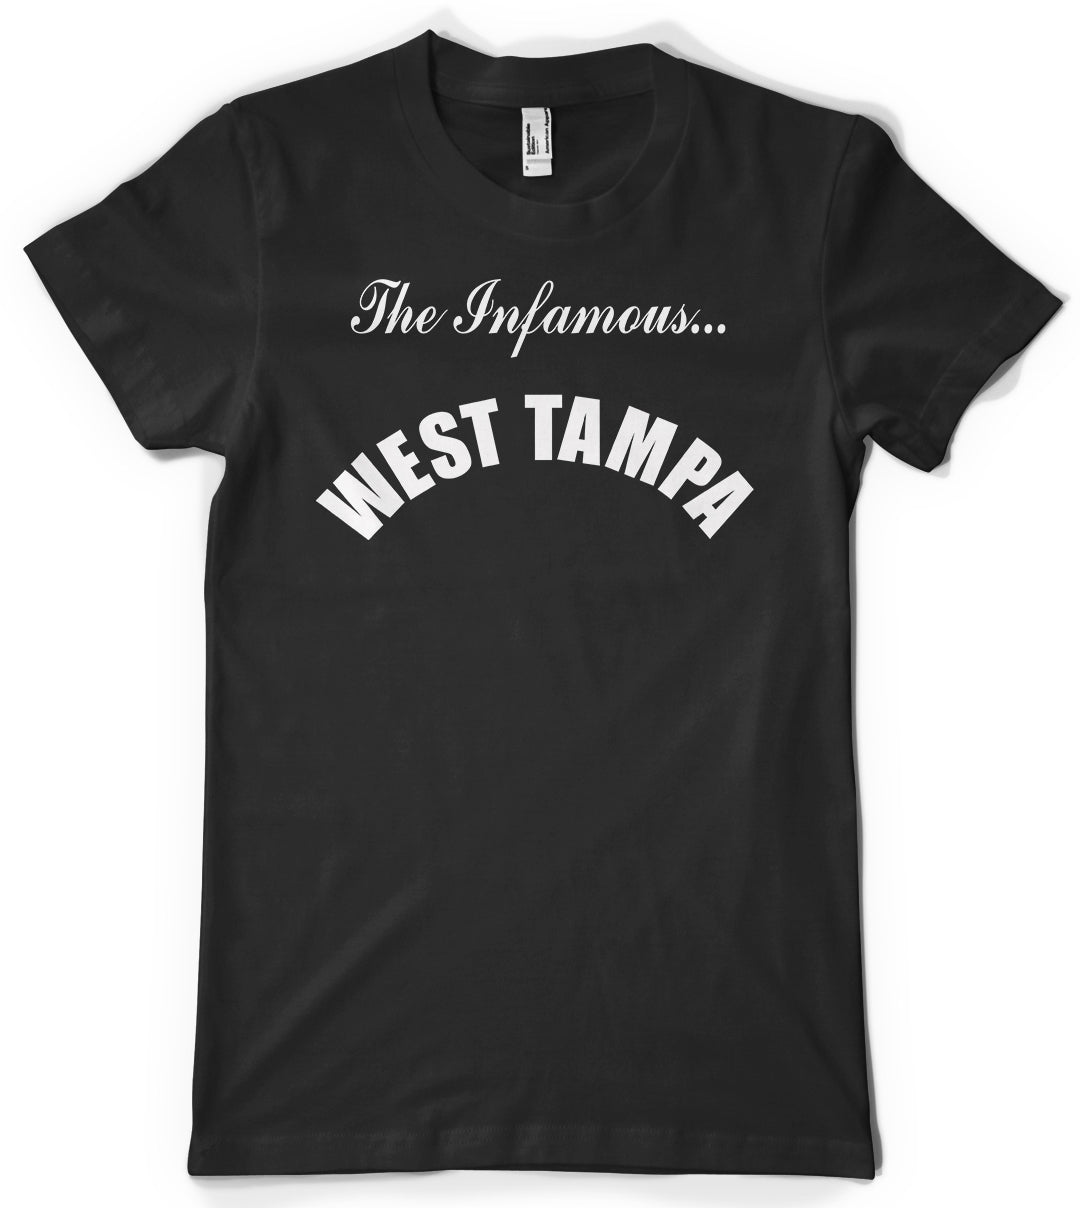 Infamous West Tampa